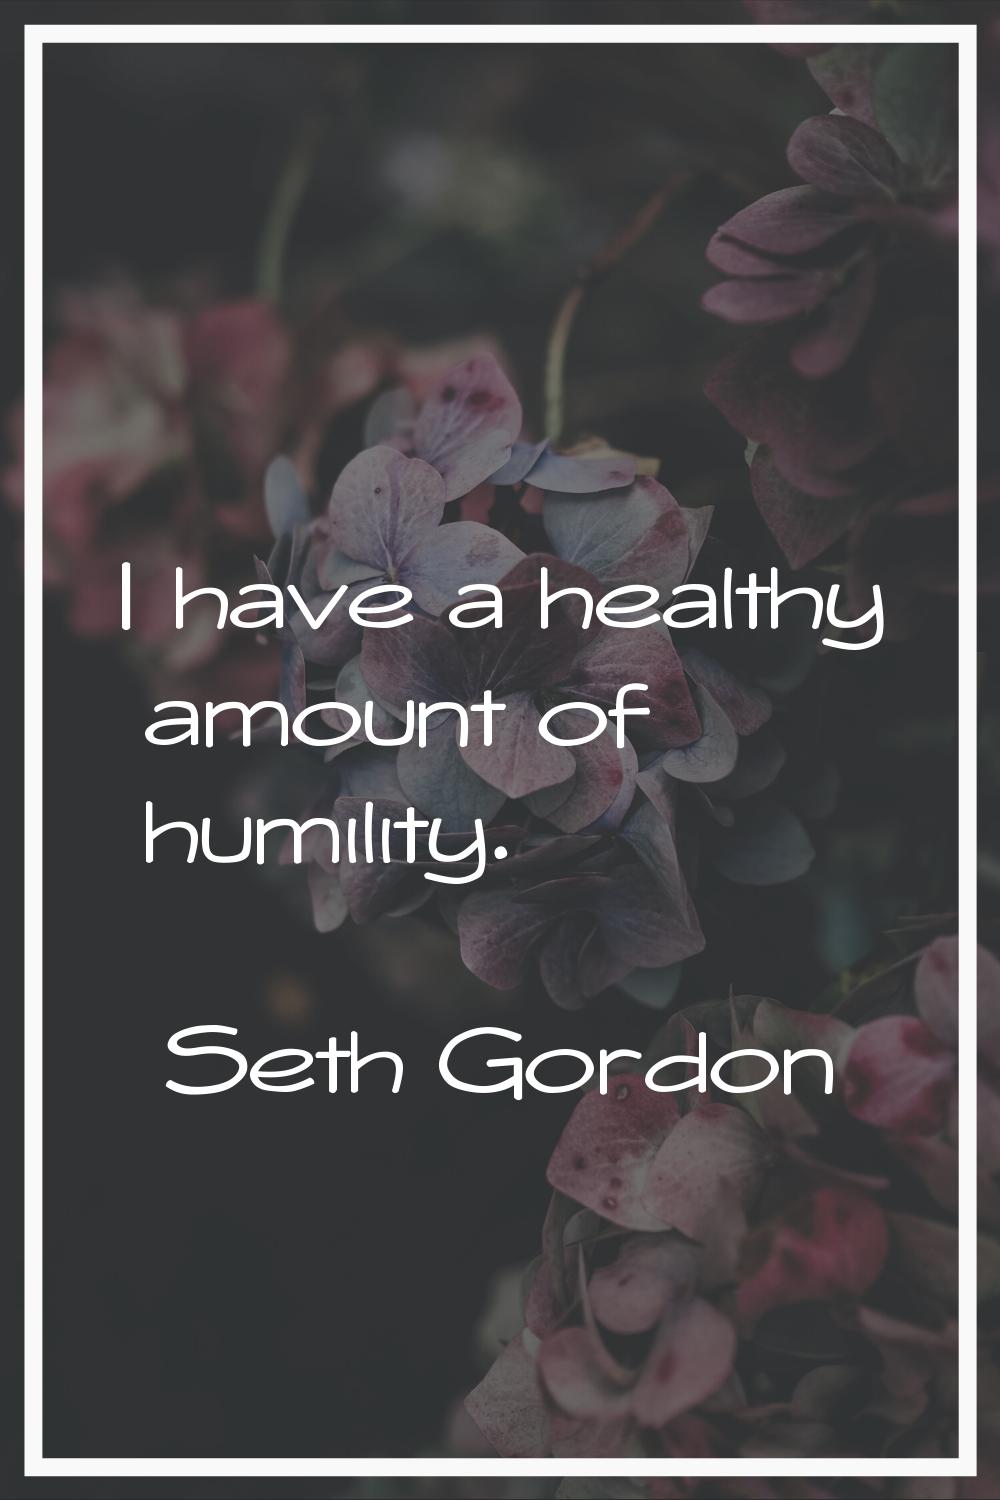 I have a healthy amount of humility.